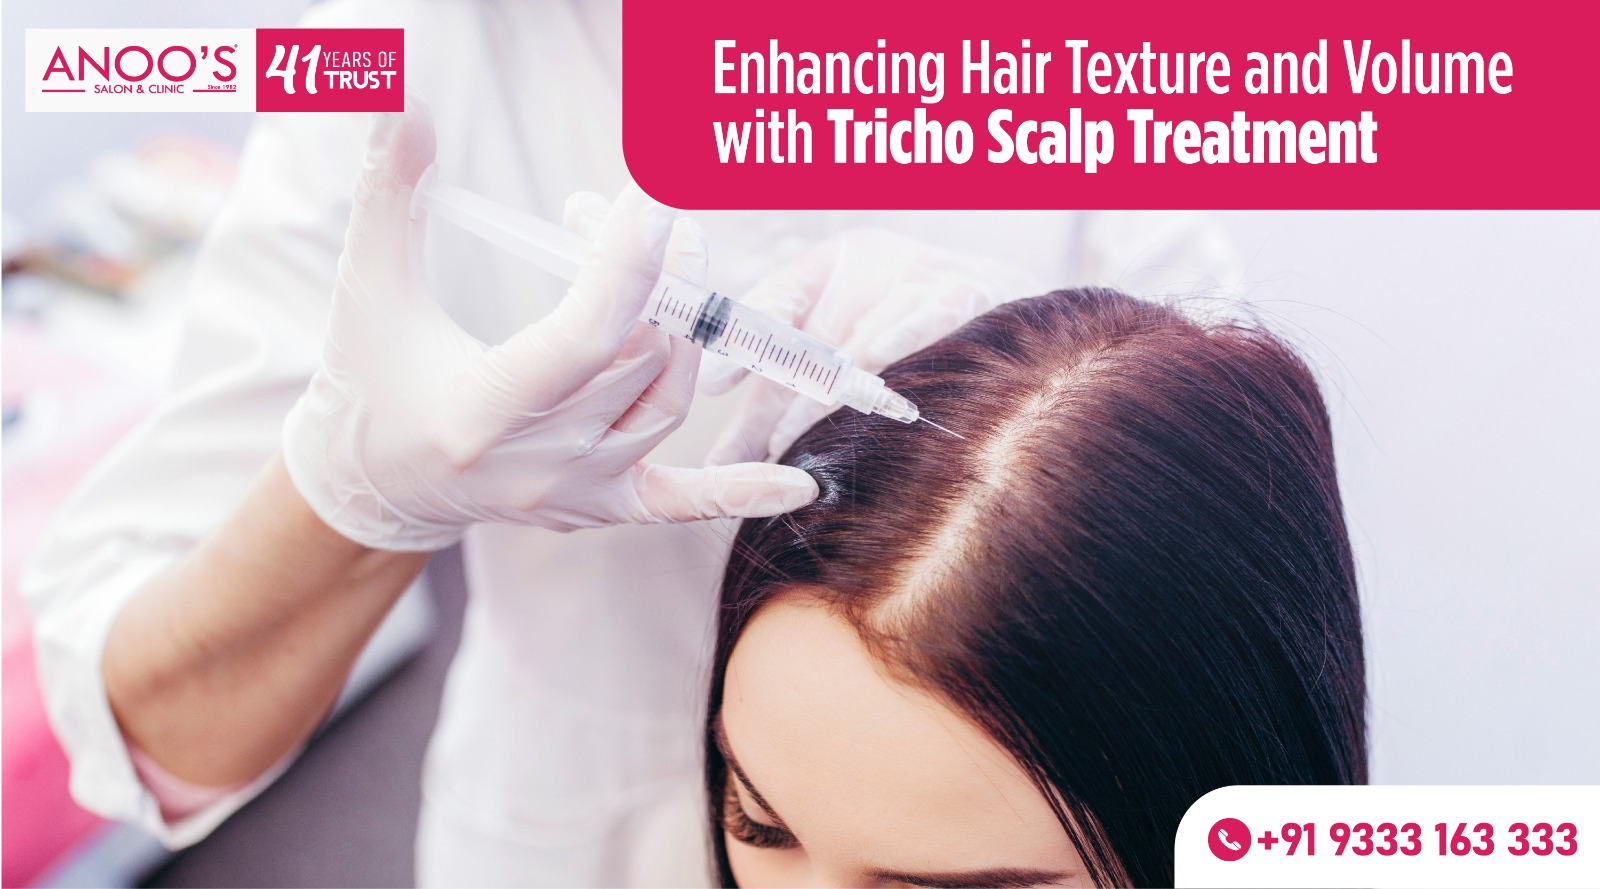 Enhancing Hair Texture and Volume with Tricho Scalp Treatment